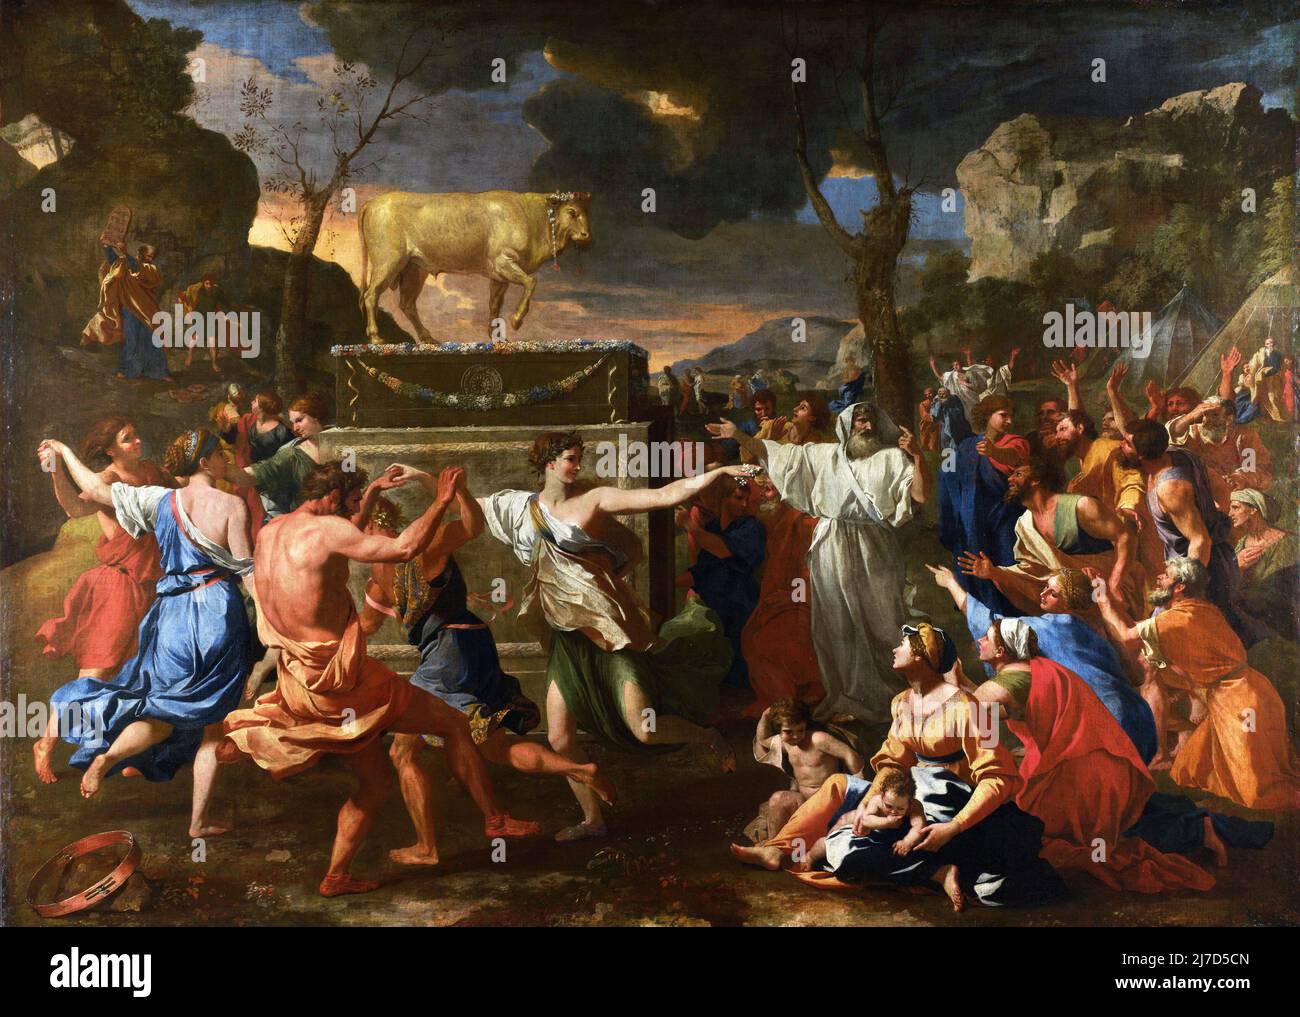 The Adoration of the Golden Calf by Nicolas Poussin (1594-1665), oil on canvas, c. 1633-34 Stock Photo